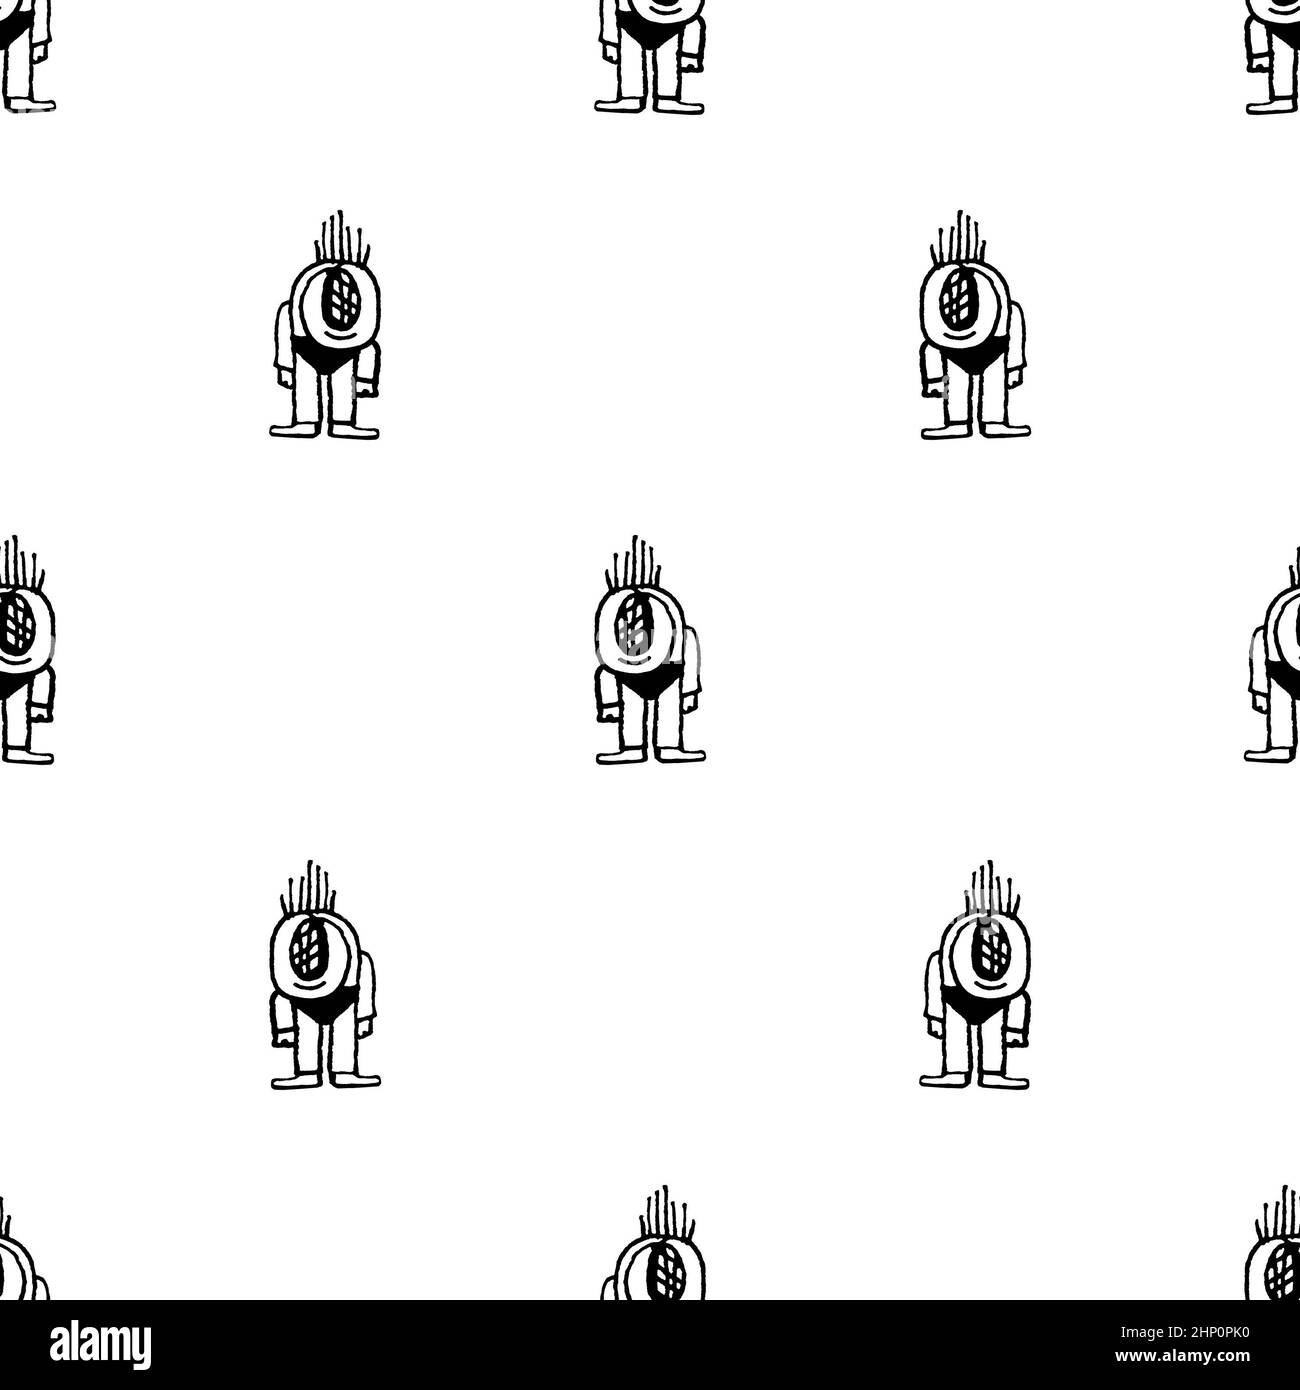 Sketchy style cute baby alien or robot black and white seamless pattern illustration Stock Photo